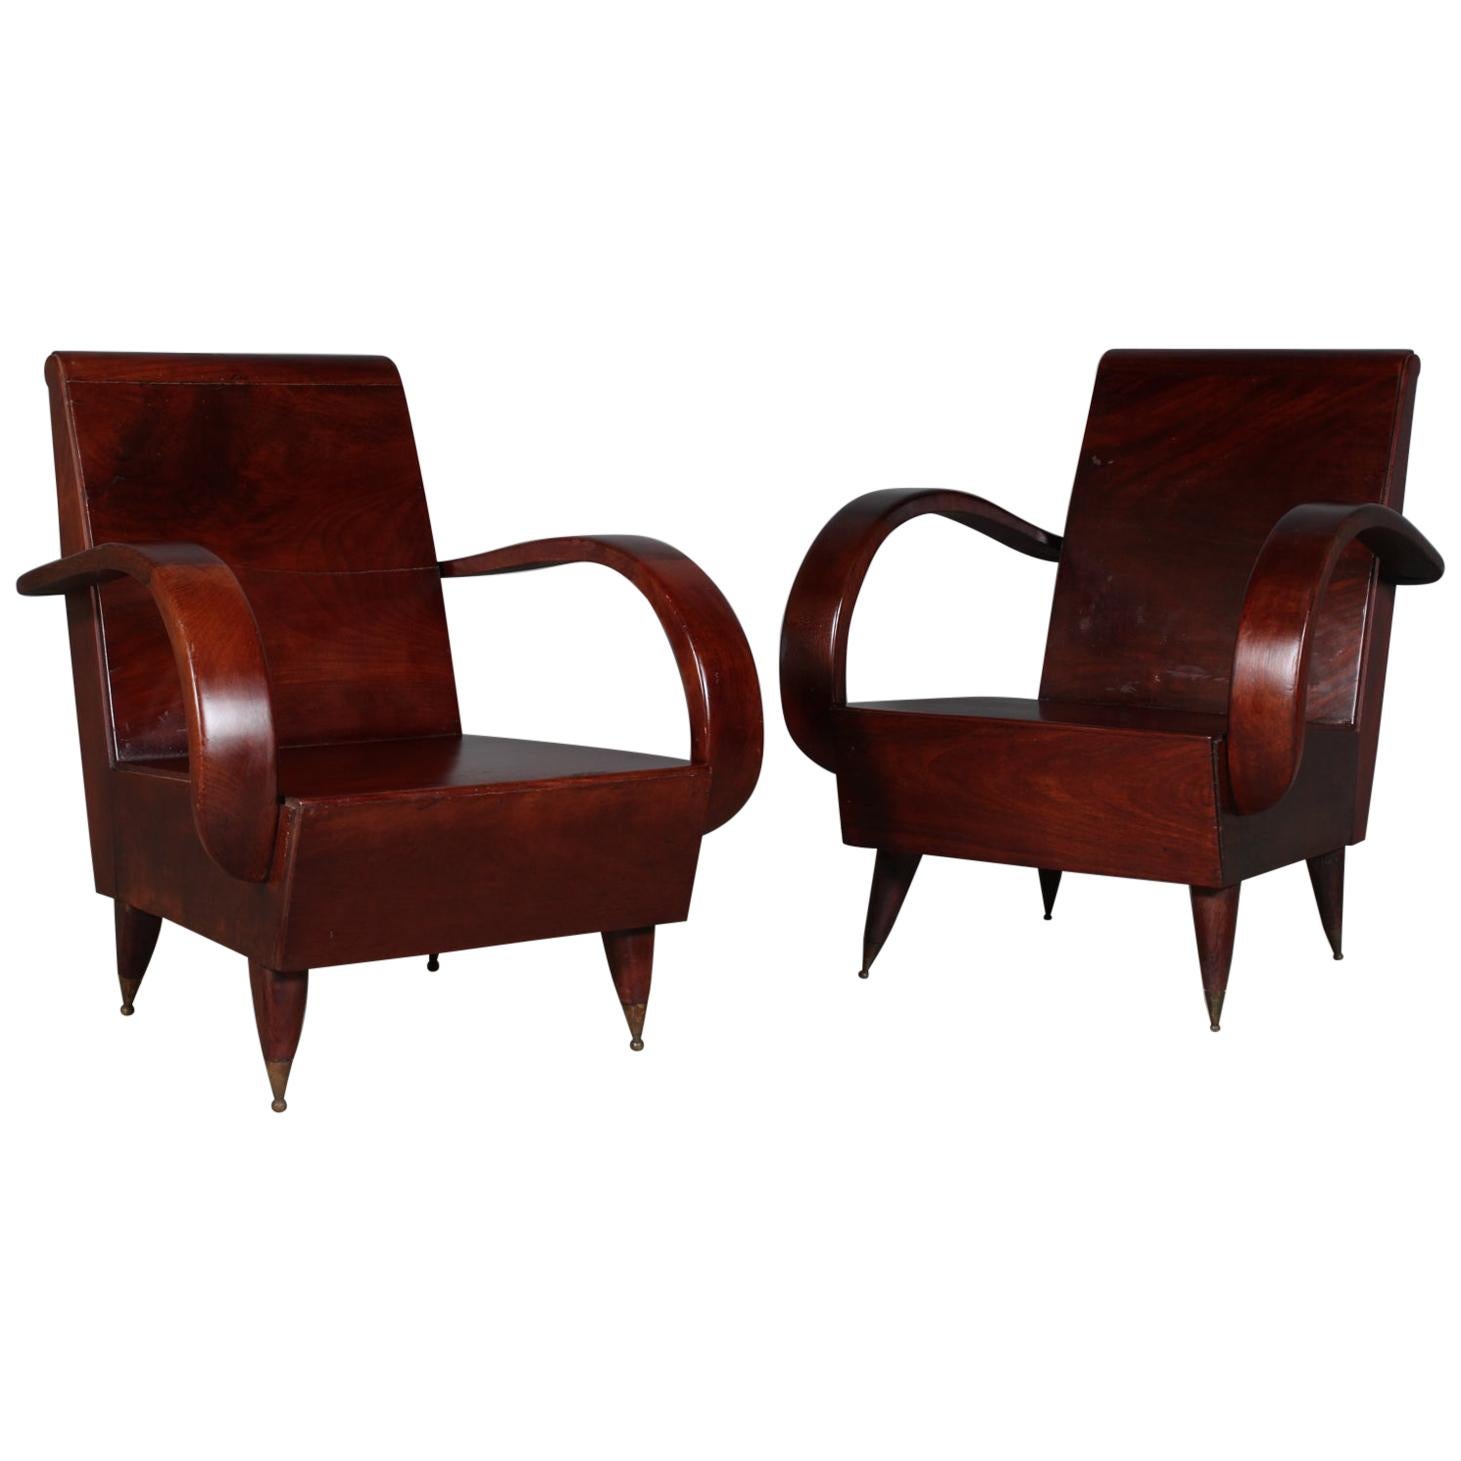 Pair of Art Deco Lounge Chairs, Second Half of the 20th Century